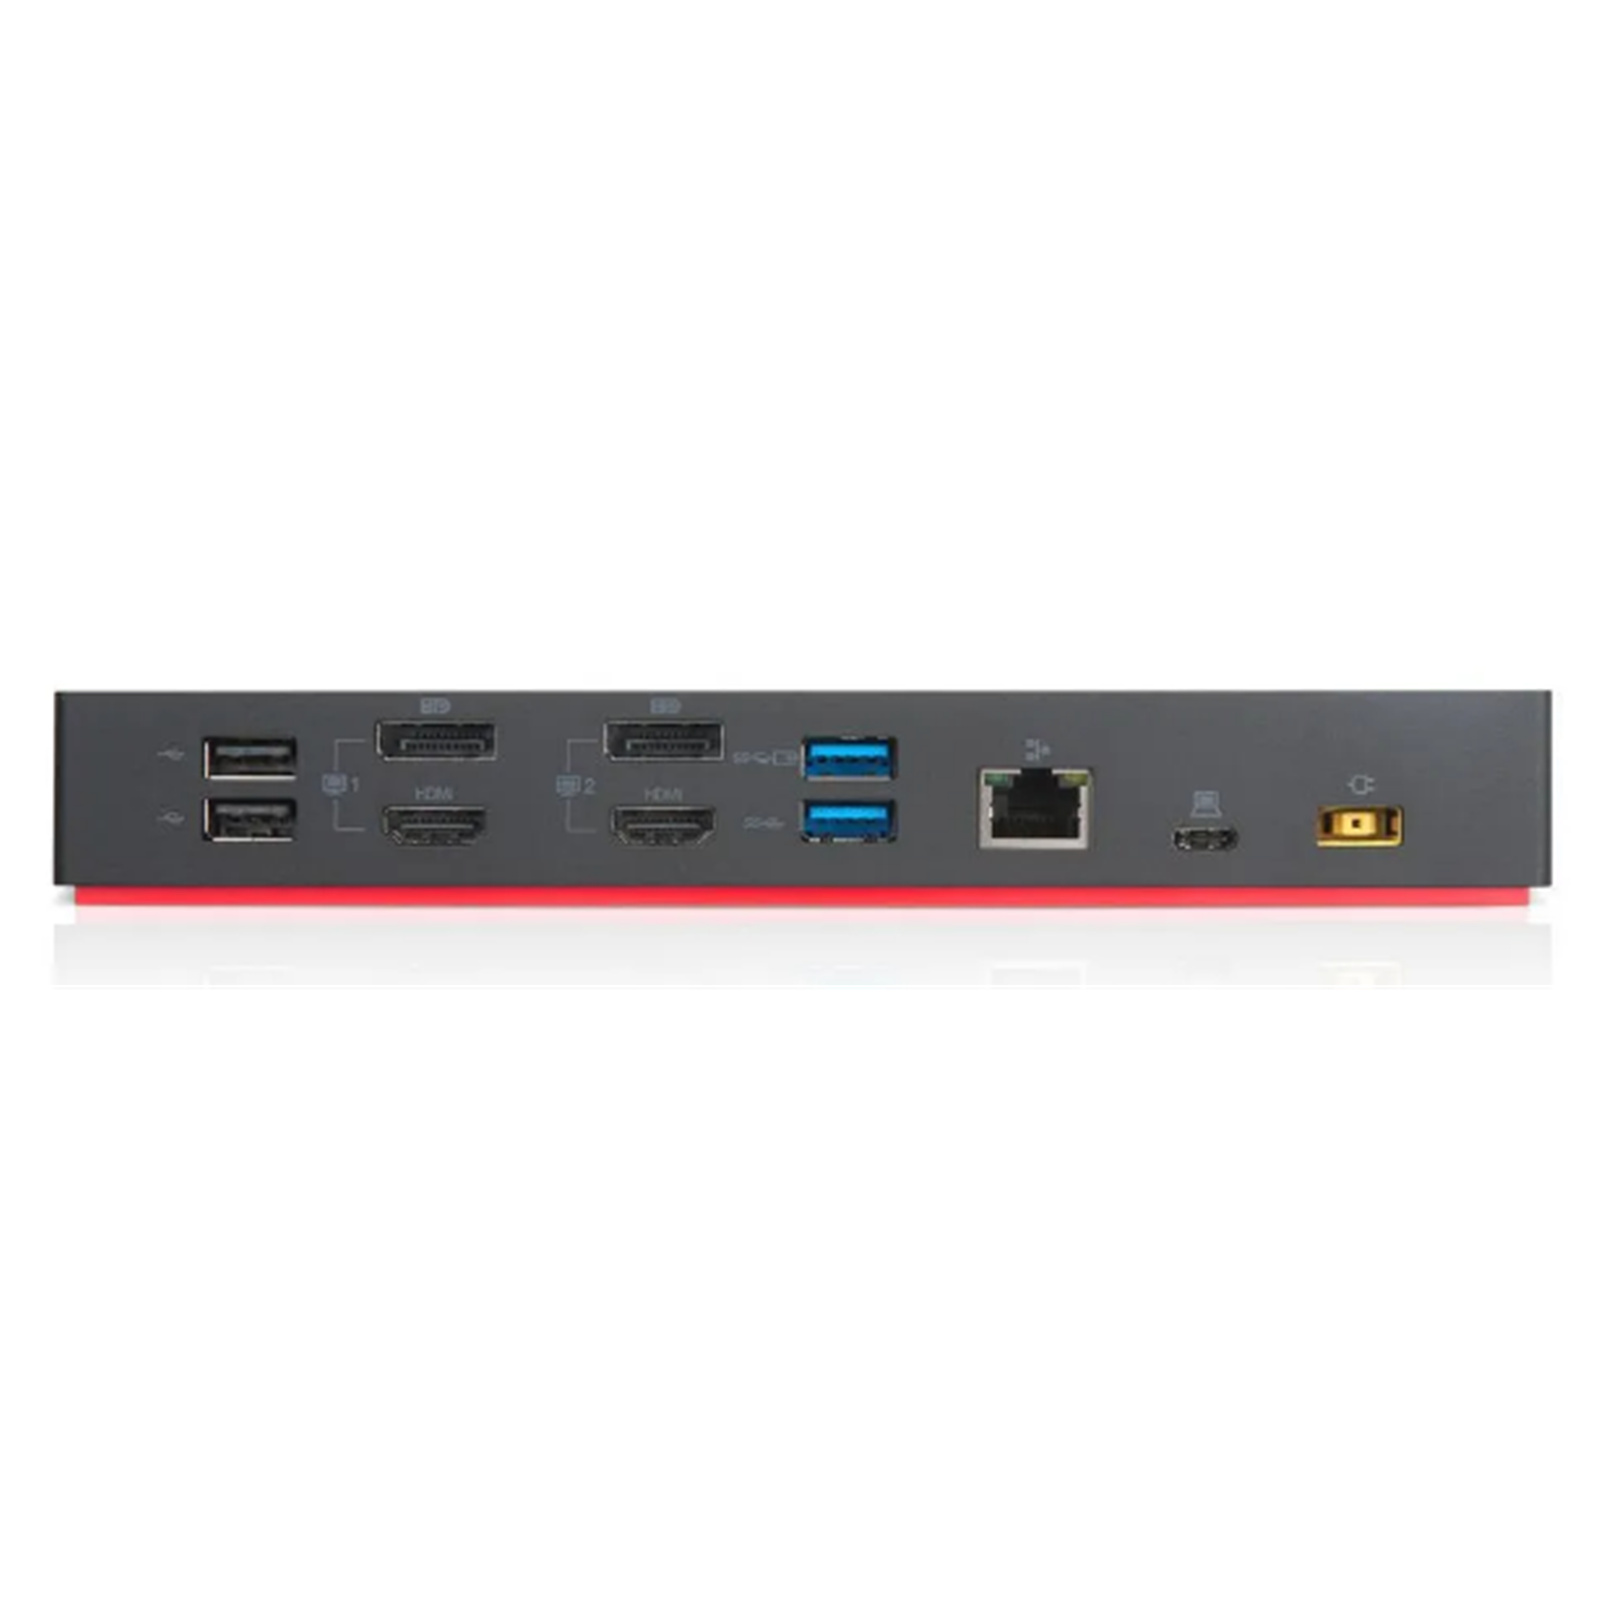 Buy the Lenovo ThinkPad Hybrid USB-C with Dual 4K Dock with 90W Power... 40AF0135AU ) online - PBTech.com/pacific